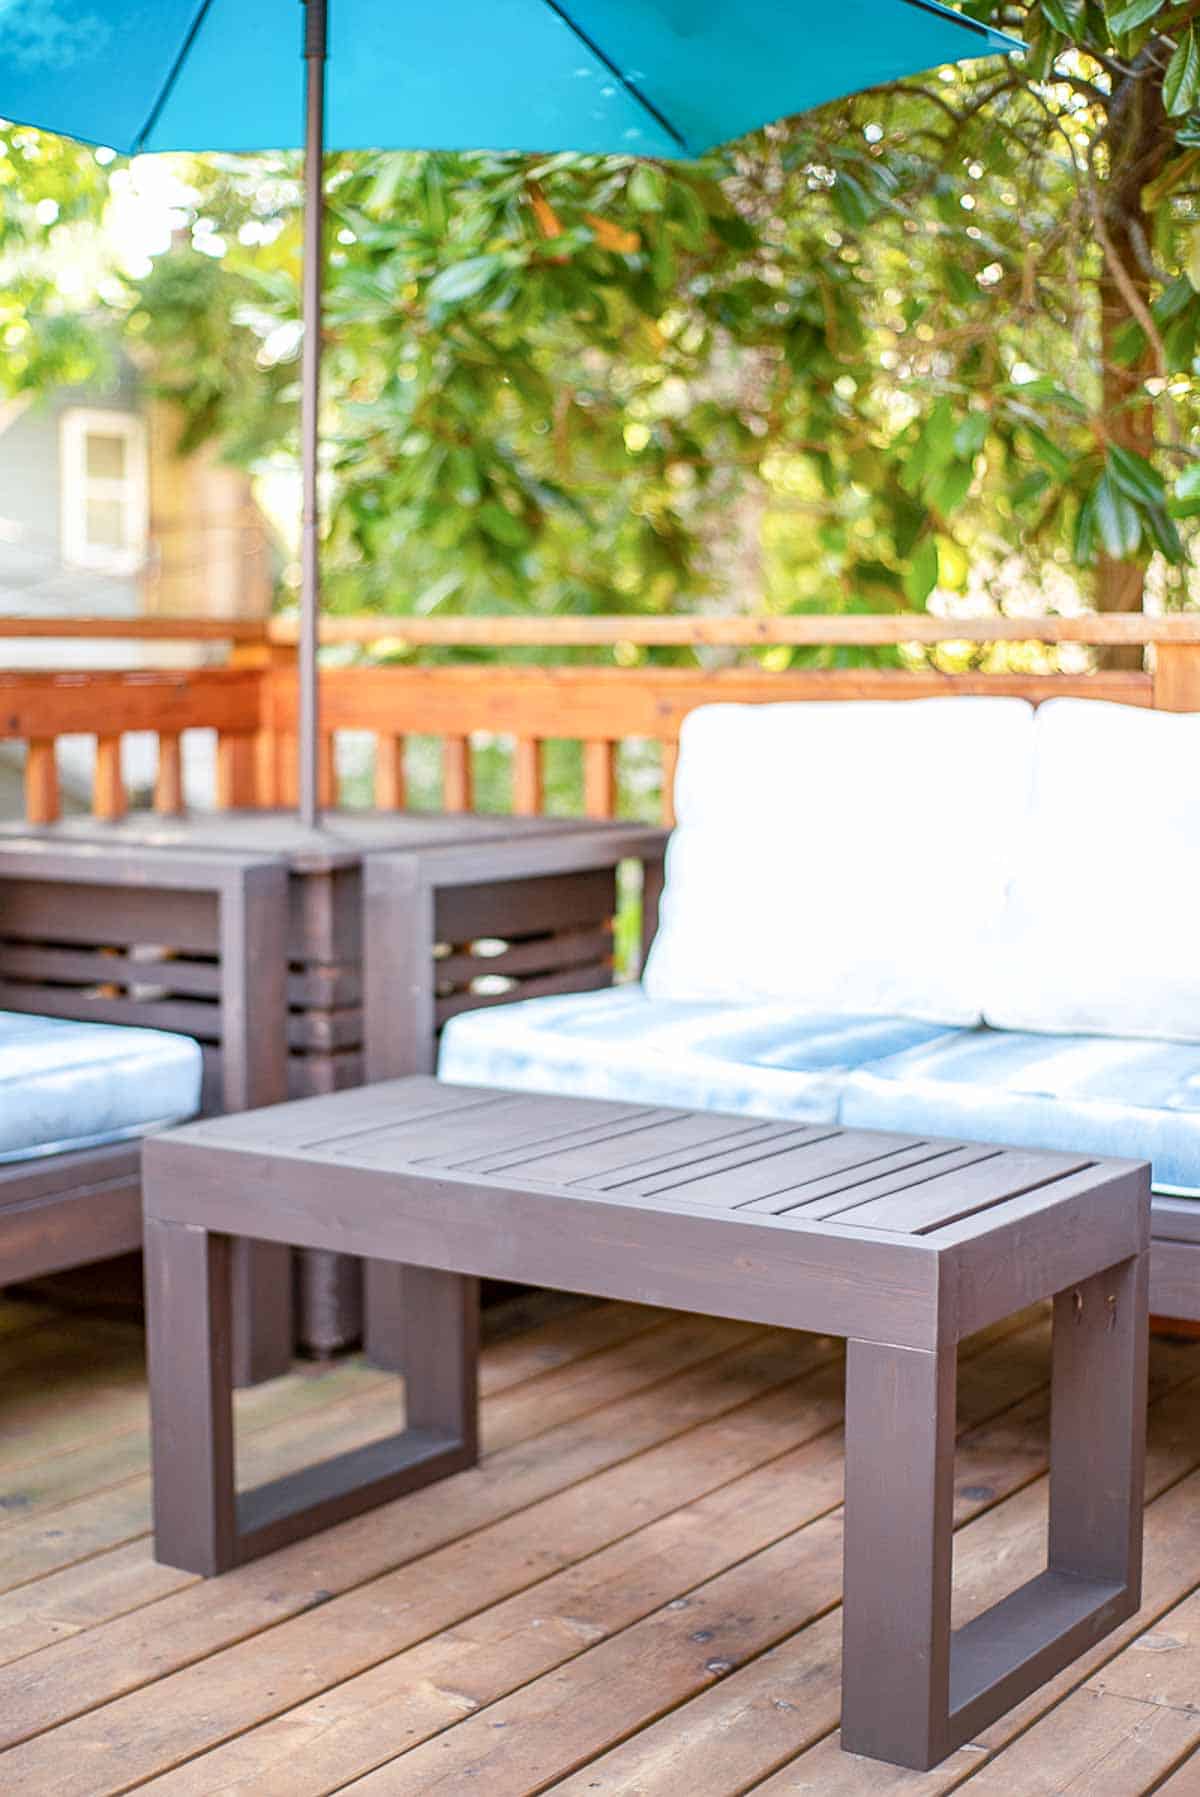 outdoor seating area on deck with DIY outdoor loveseat, sofa, coffee table and umbrella side table